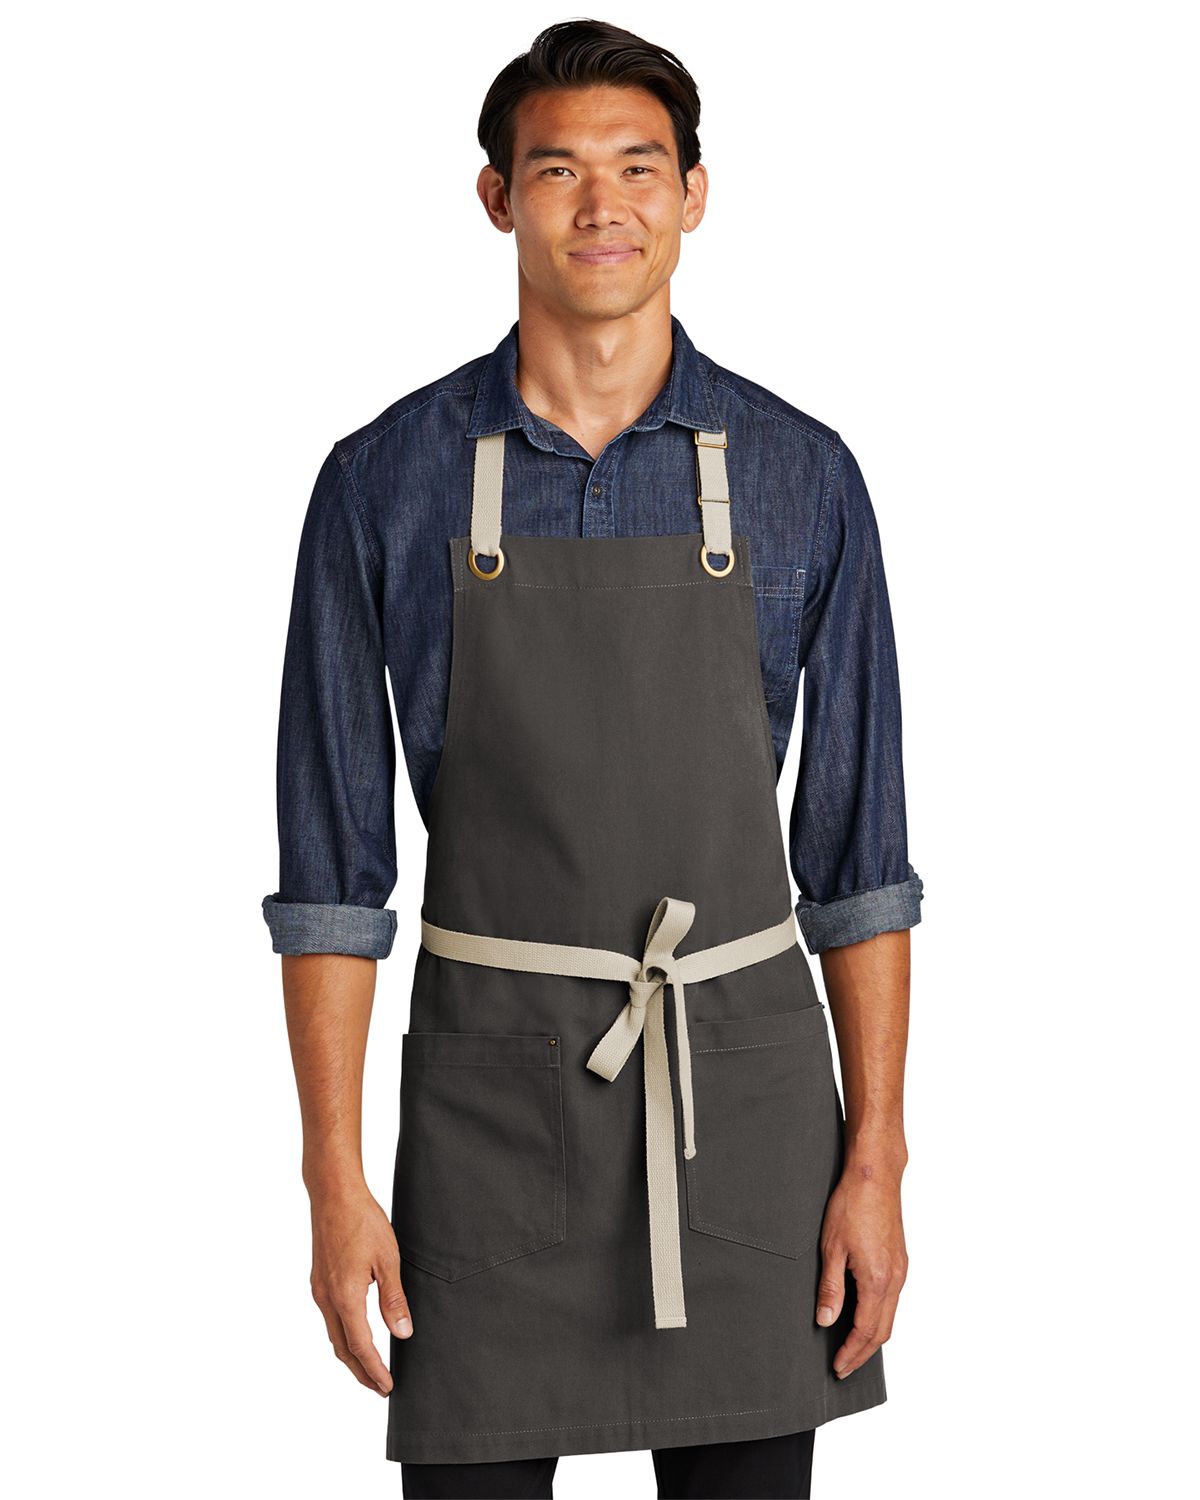 Port Authority A815 Canvas Full-Length Two-Pocket Apron